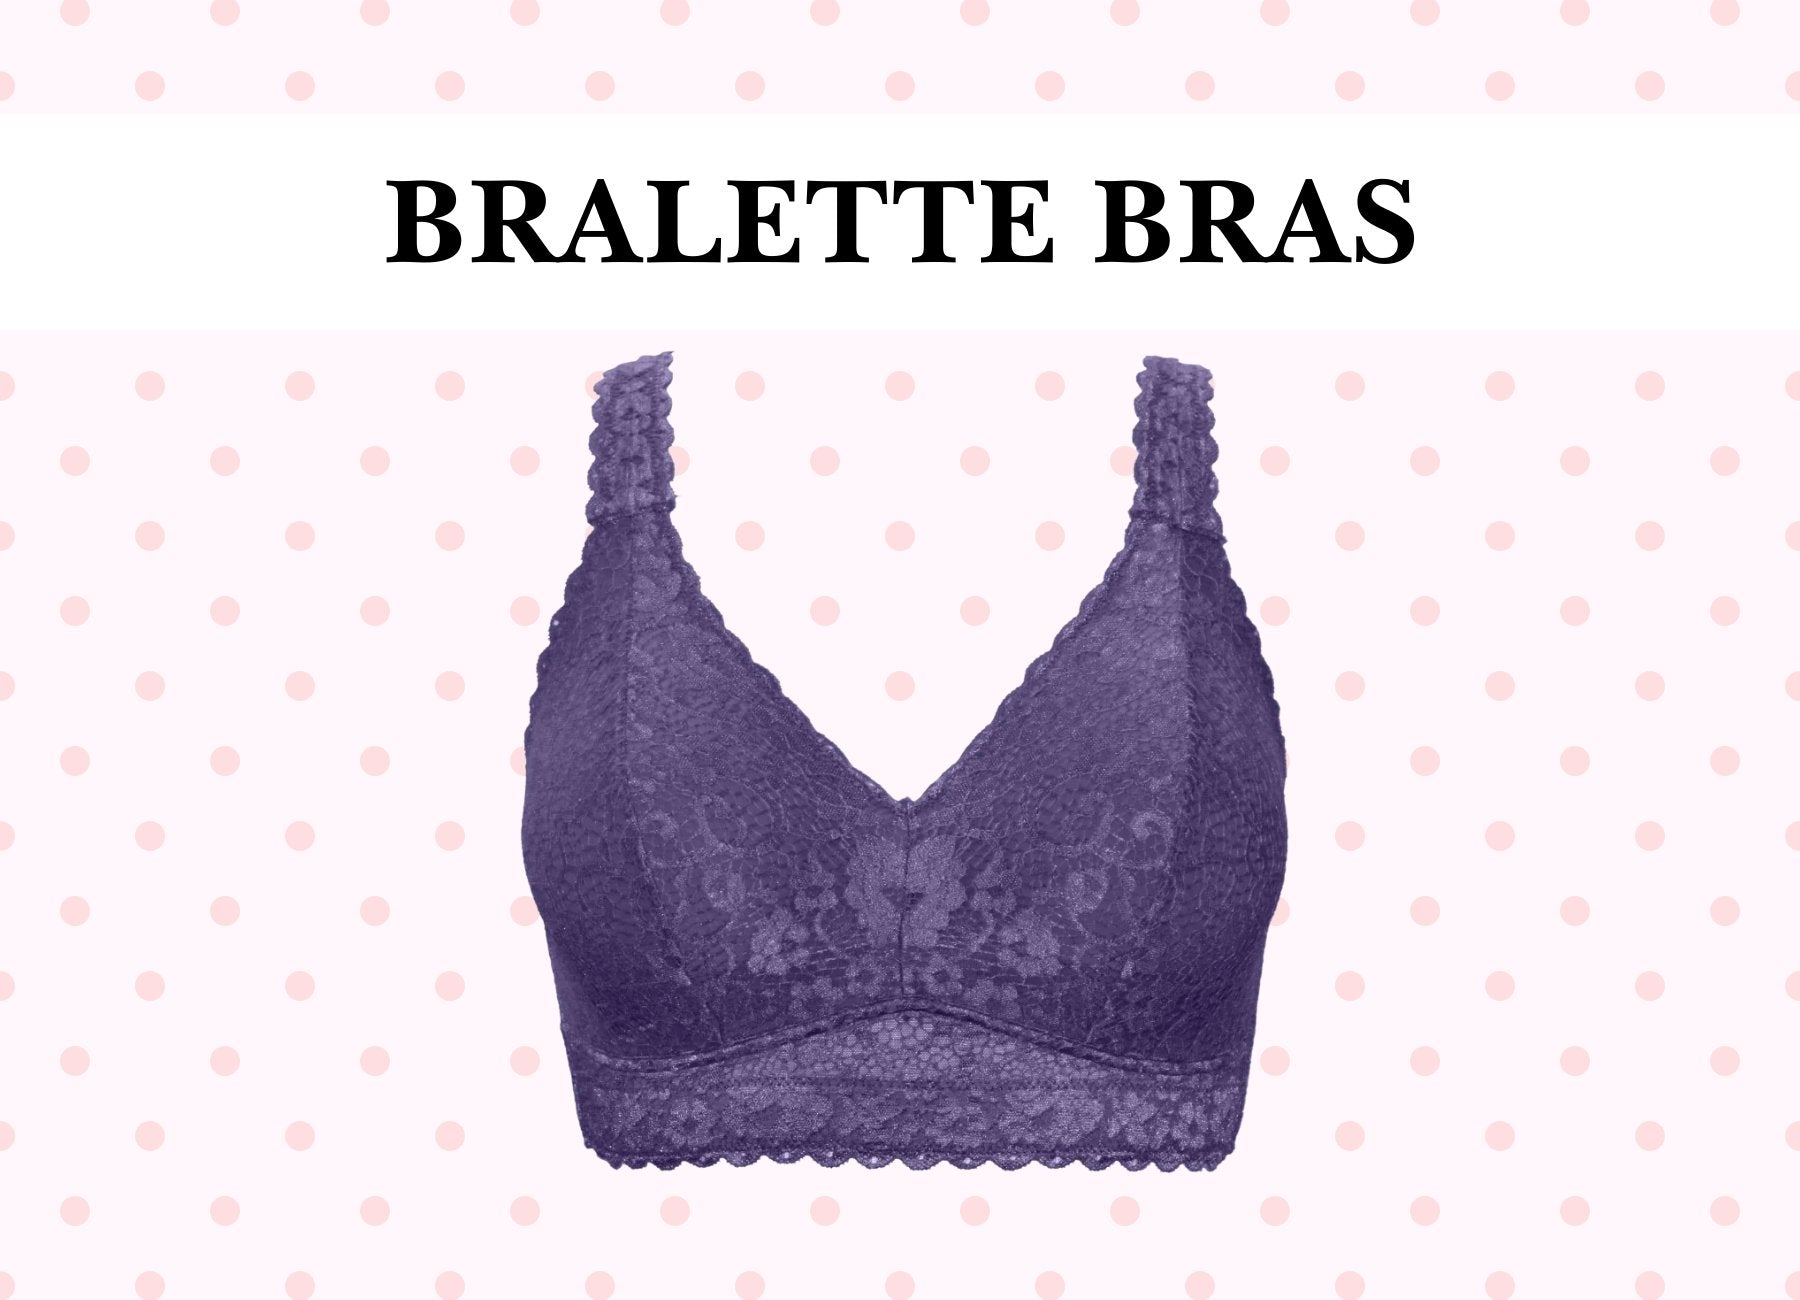 Amazing Bra Hacks For Women With A Larger Bust – Parfait Lingerie India